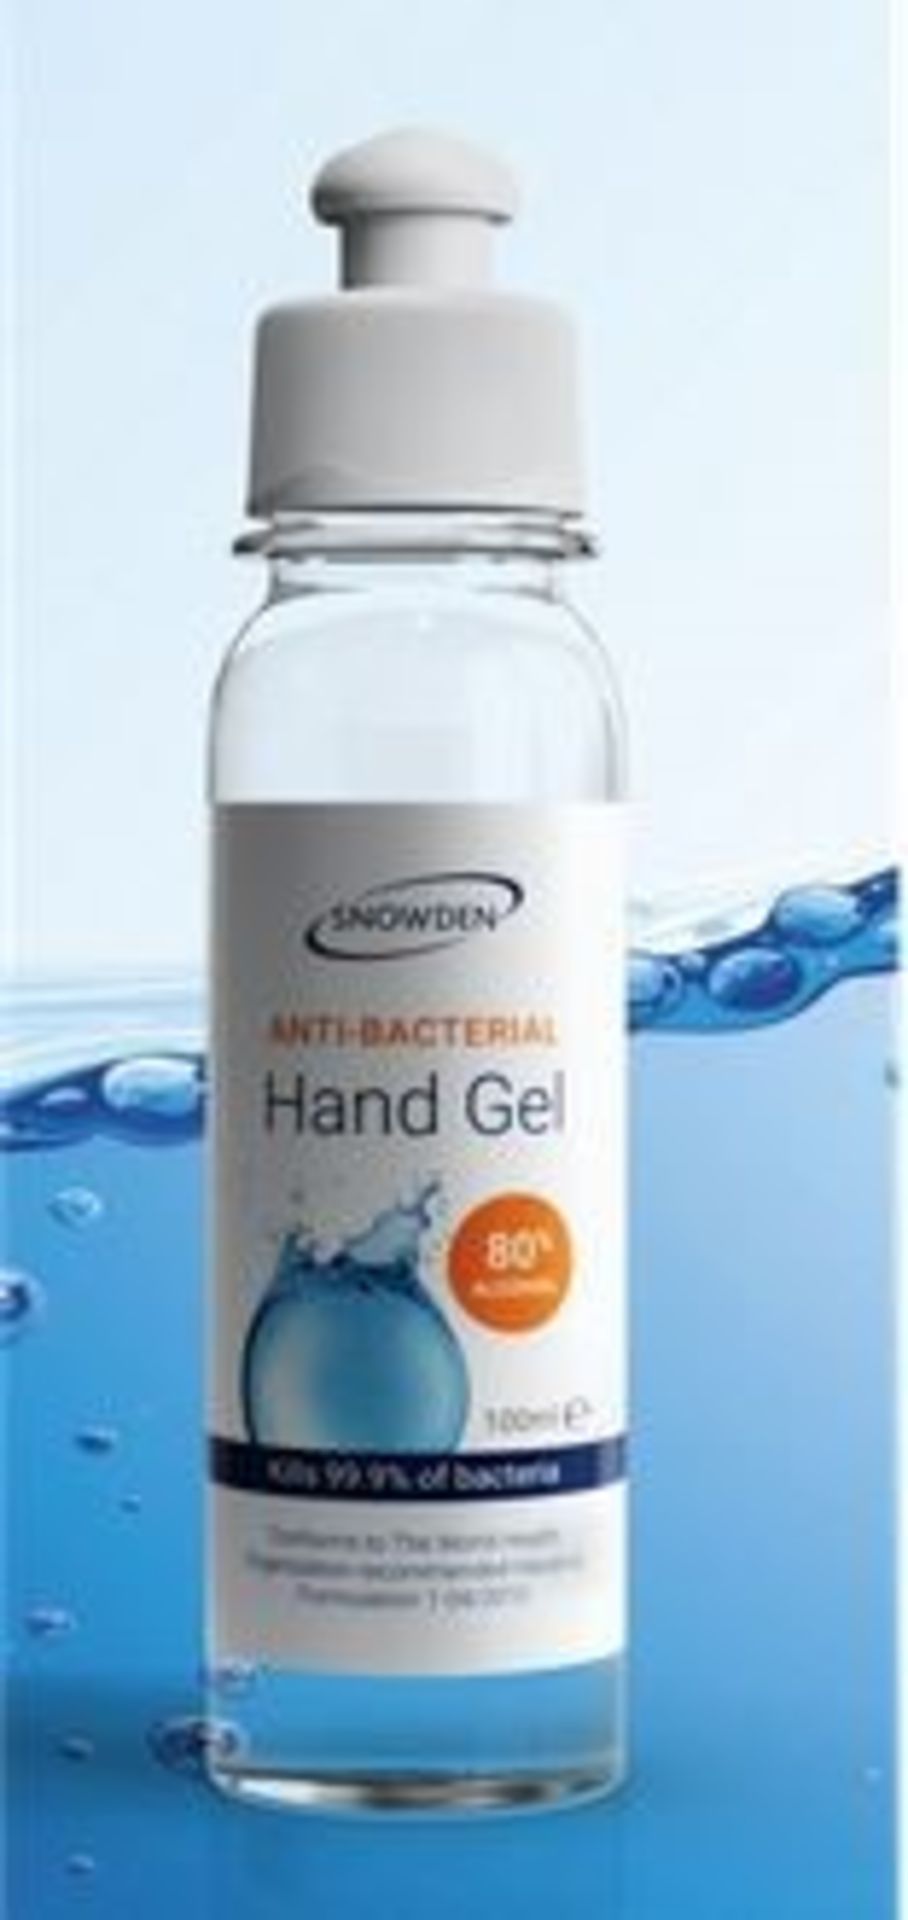 1 LOT TO CONTAIN A BOX OF 50 X SNOWDEN HEALTHCARE ANTI-BACTERIAL HAND GEL 70% ALCOHOL 50ML BOTTLES /